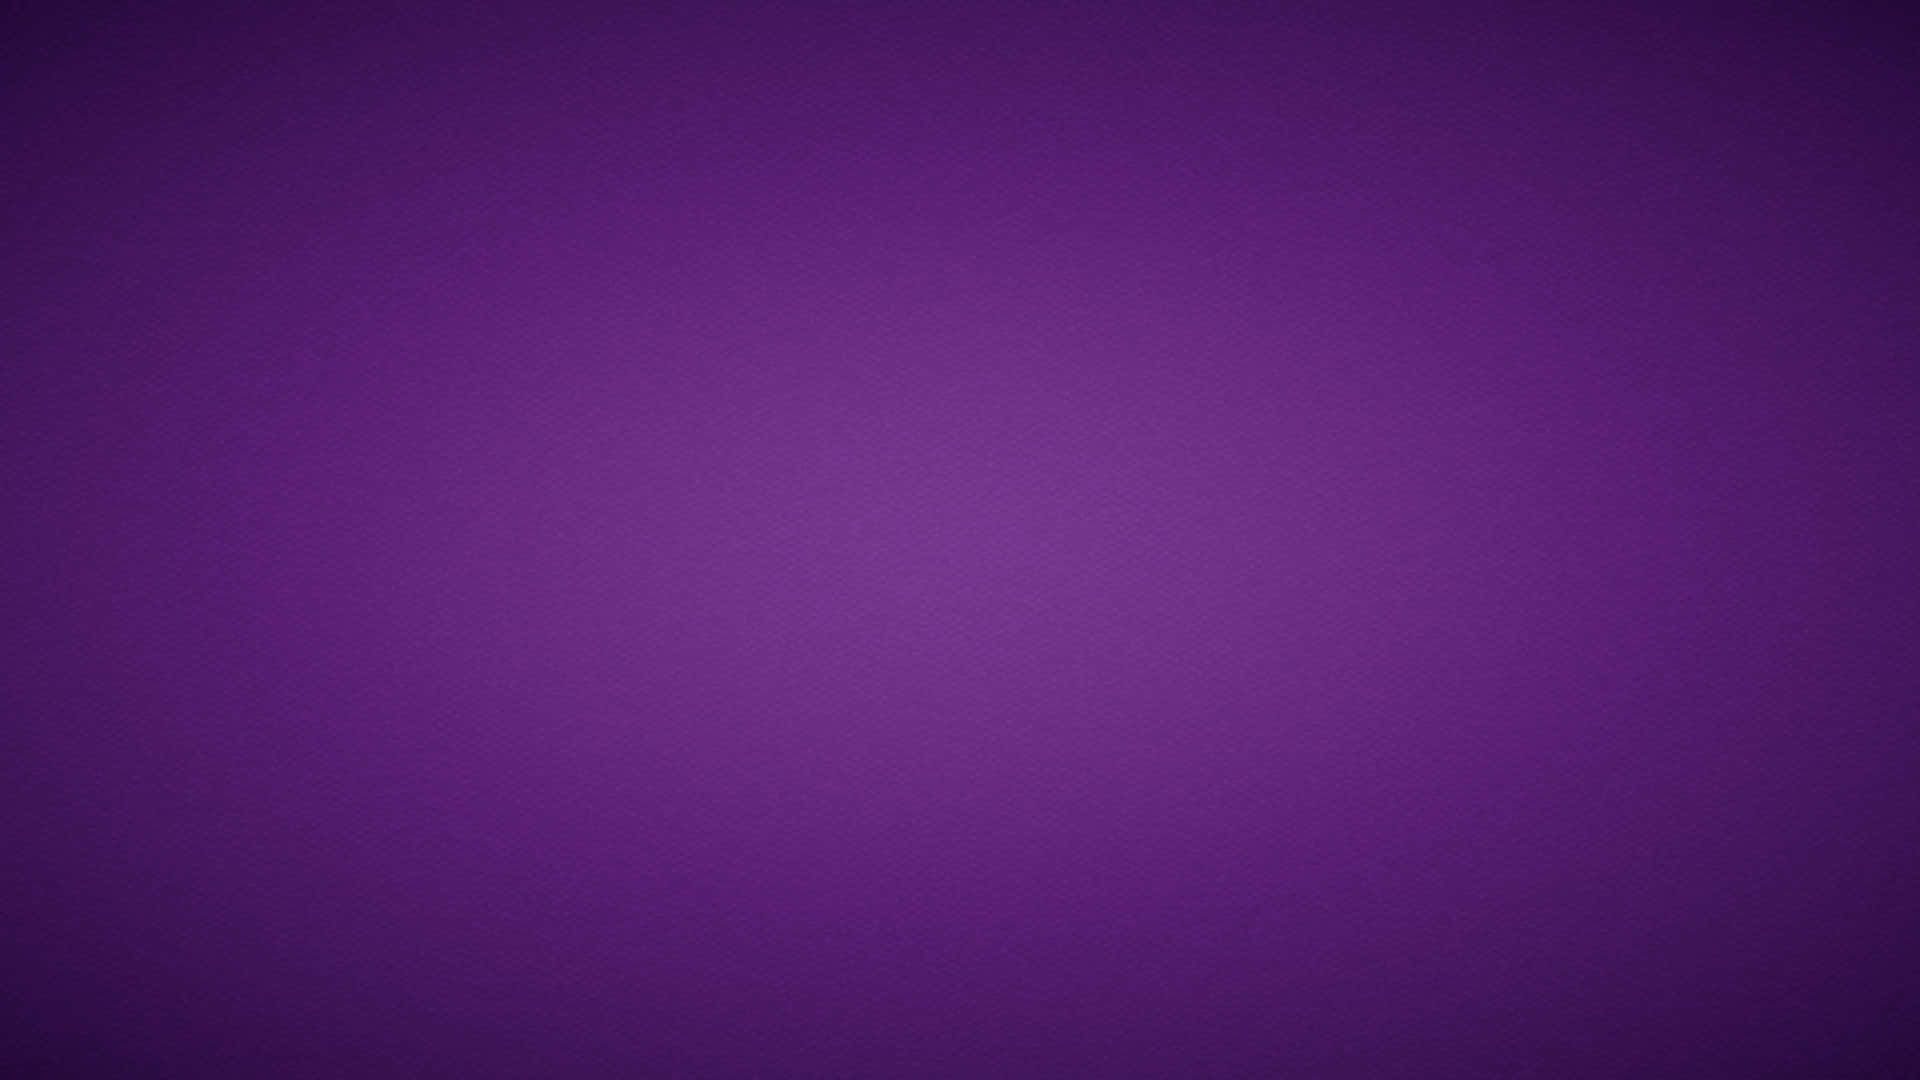 Solid Purple Background